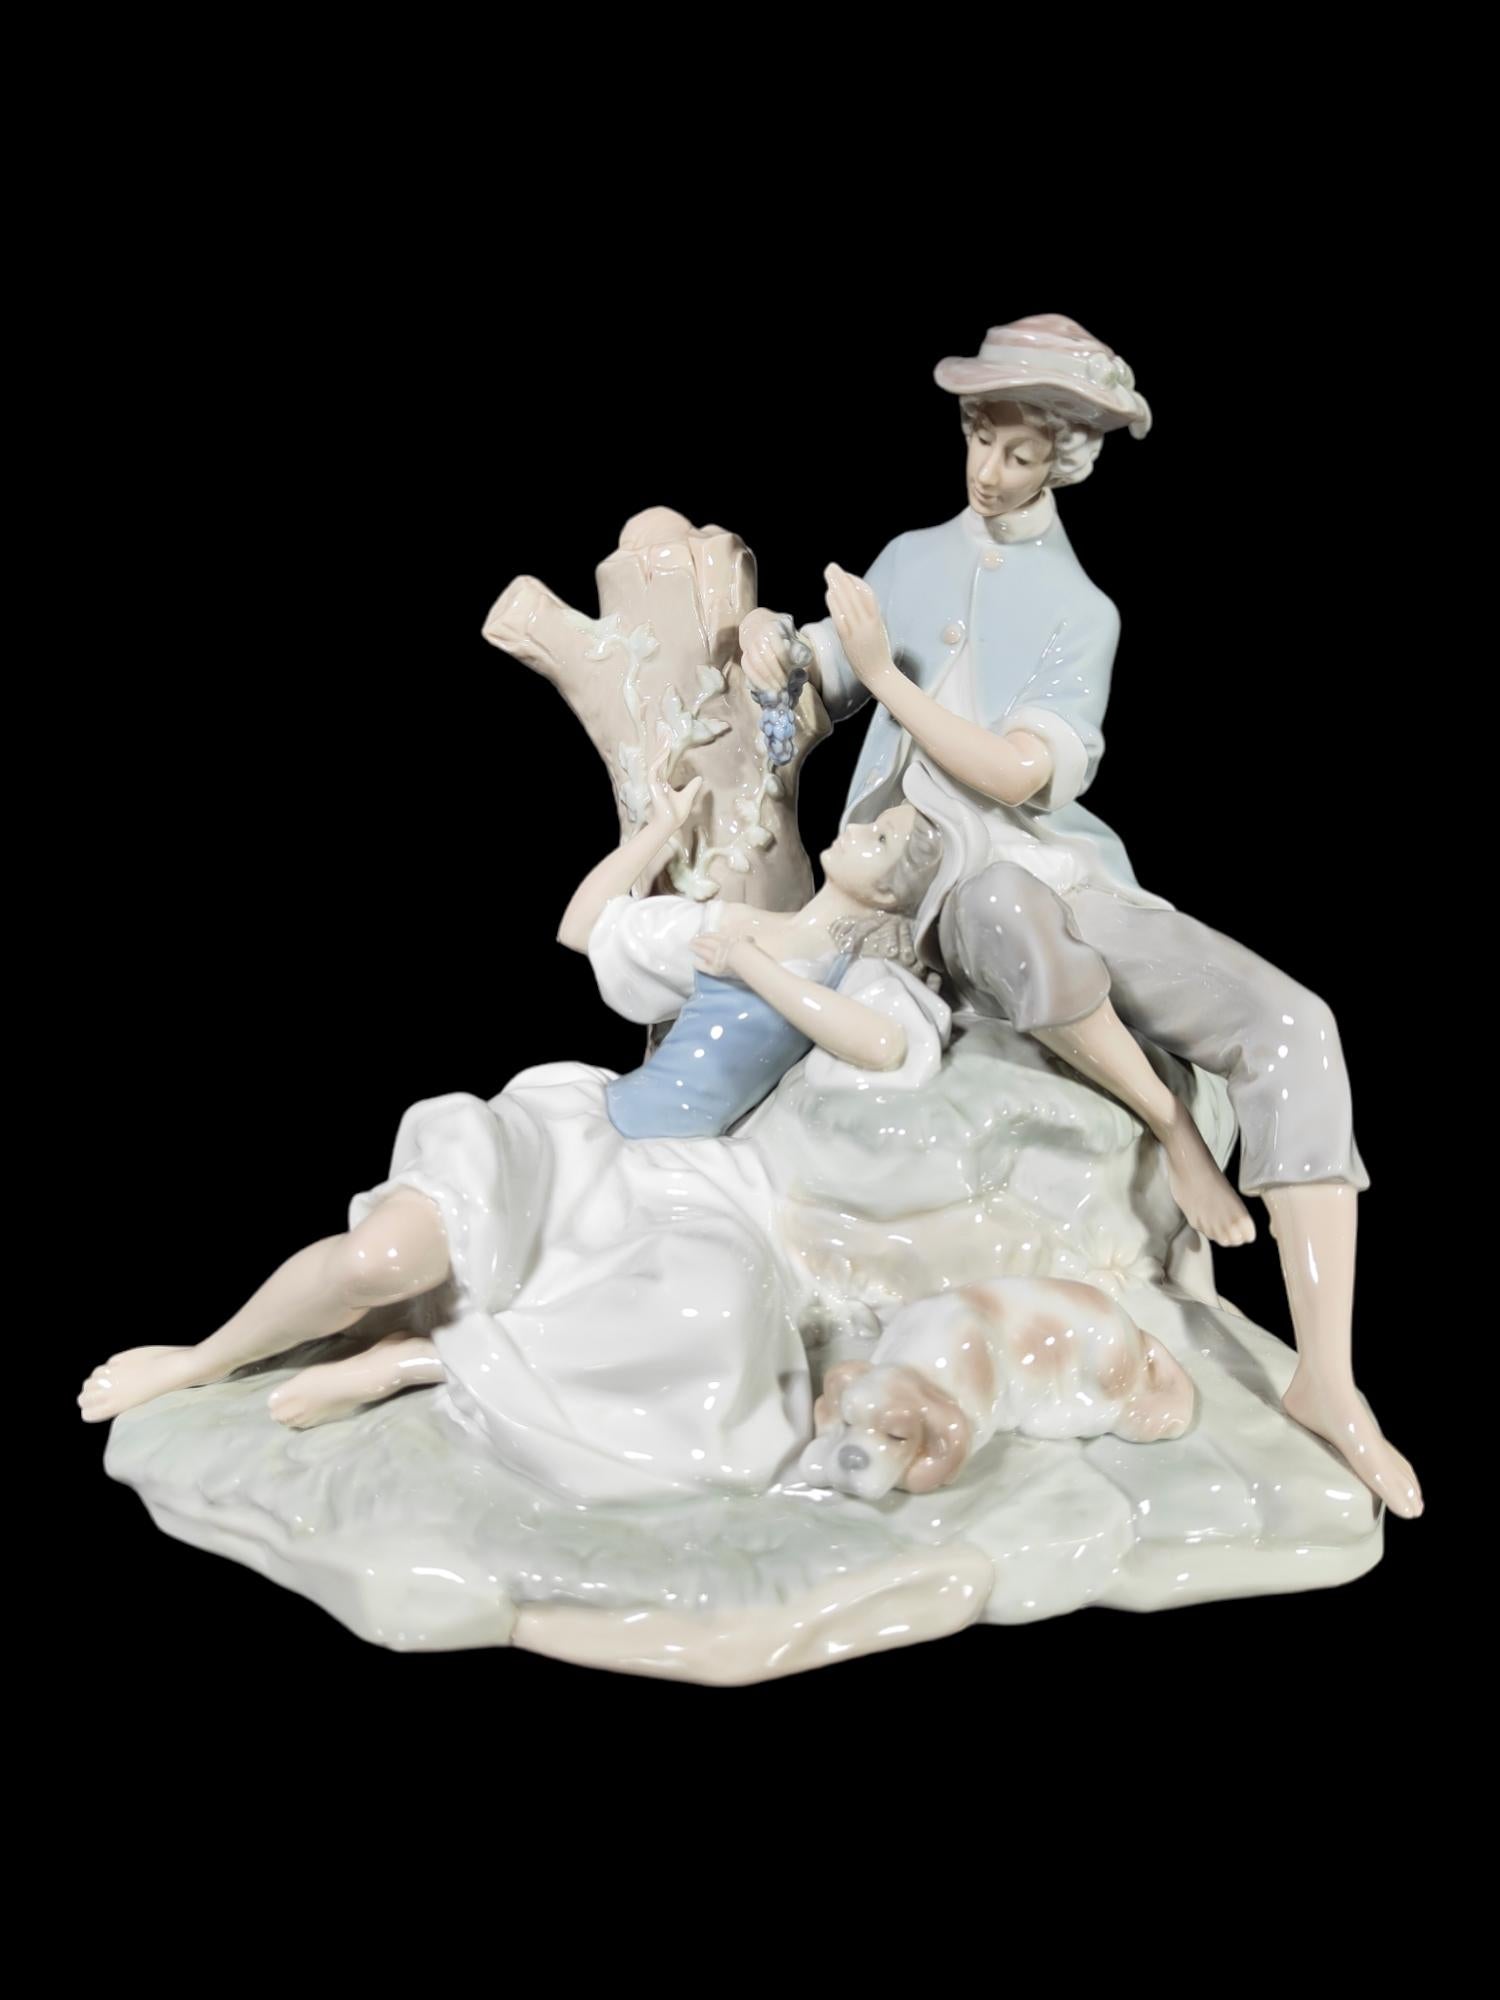 Elegant romantic sculpture with 2 characters dressed from the 1900s era of lladro porcelain made in the 1970s. Discontinued. Perfect condition. Measures: 30x30x29 cm.
The Lladró factory is known for being the most prestigious firm of porcelain